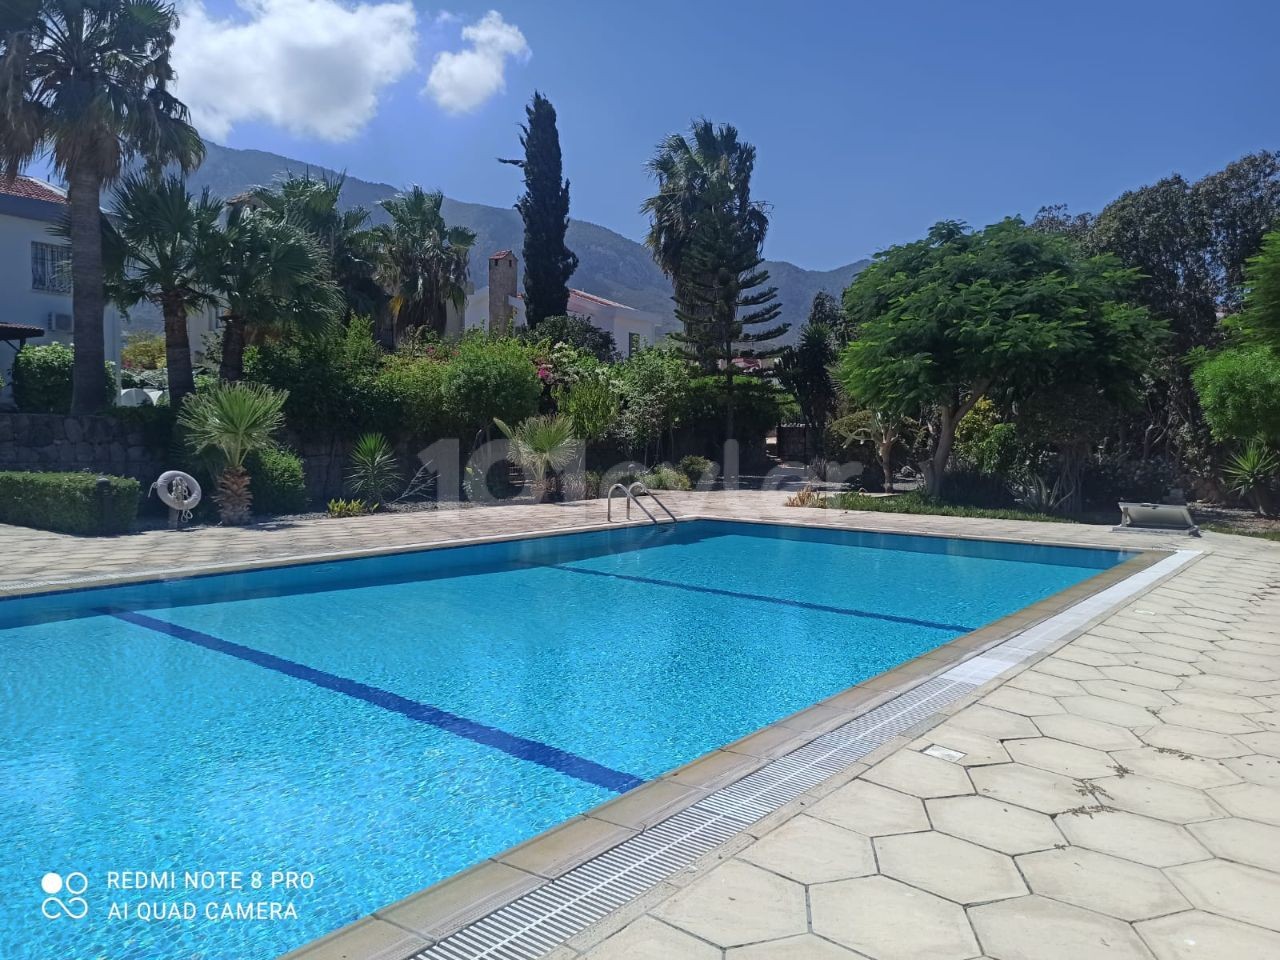 3+ 1 FURNISHED VILLA FOR RENT IN OZANKOY ** 